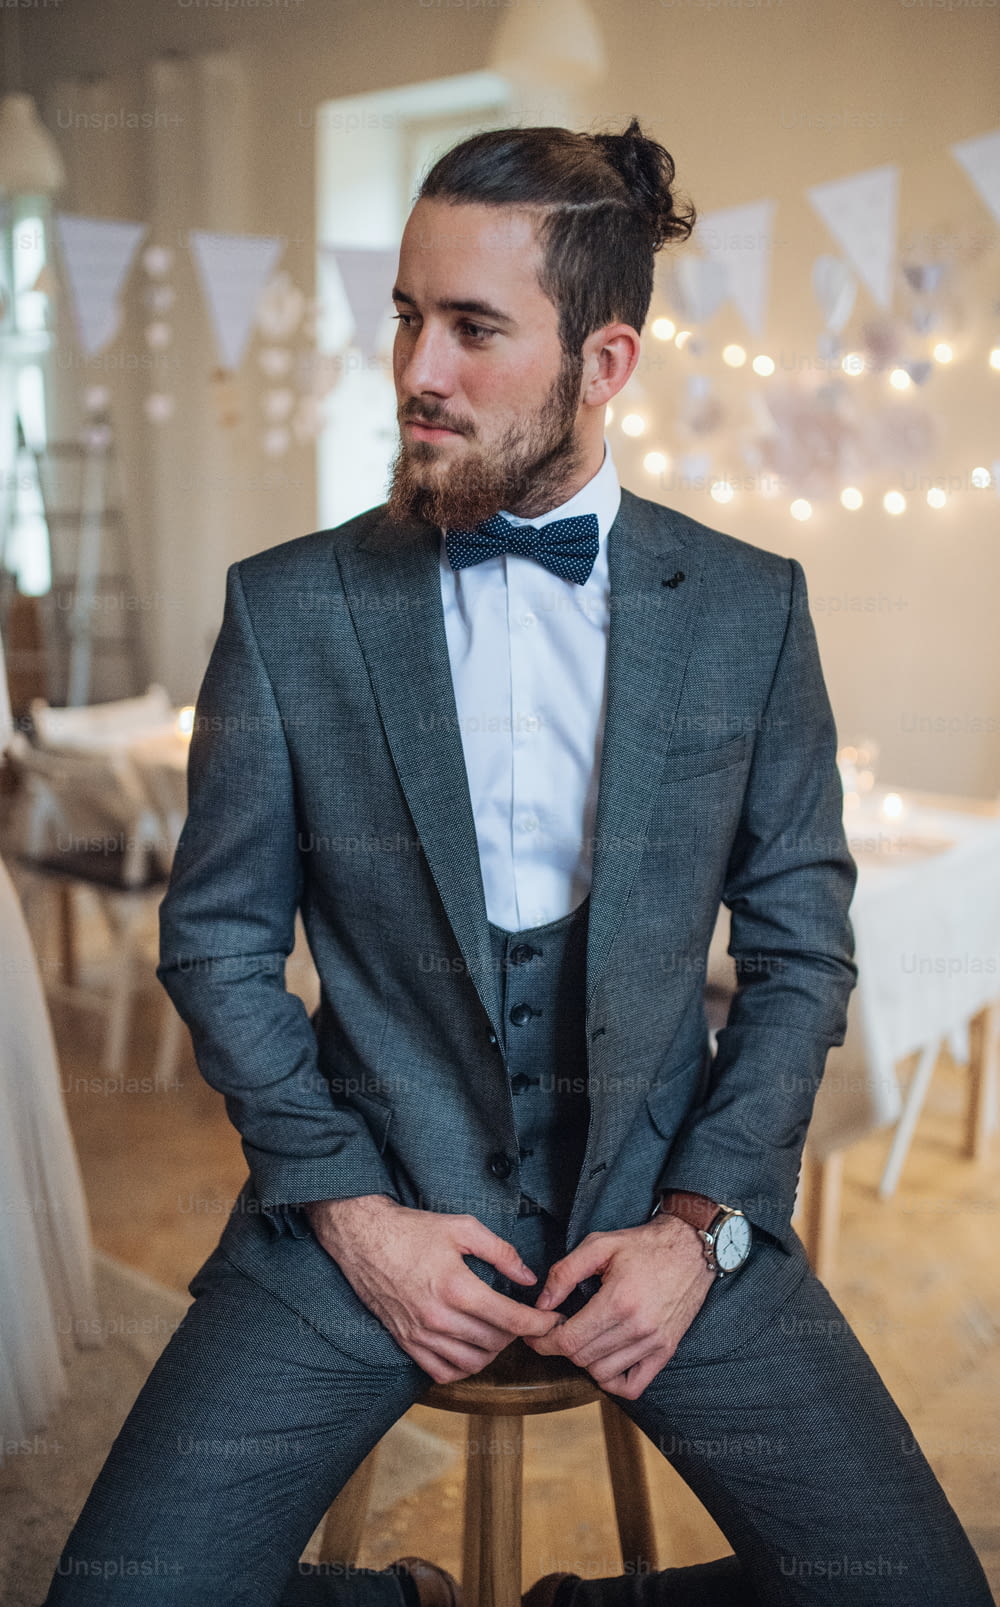 A handsome hipster young man with formal suit sitting on a stool on an indoor party, looking away.